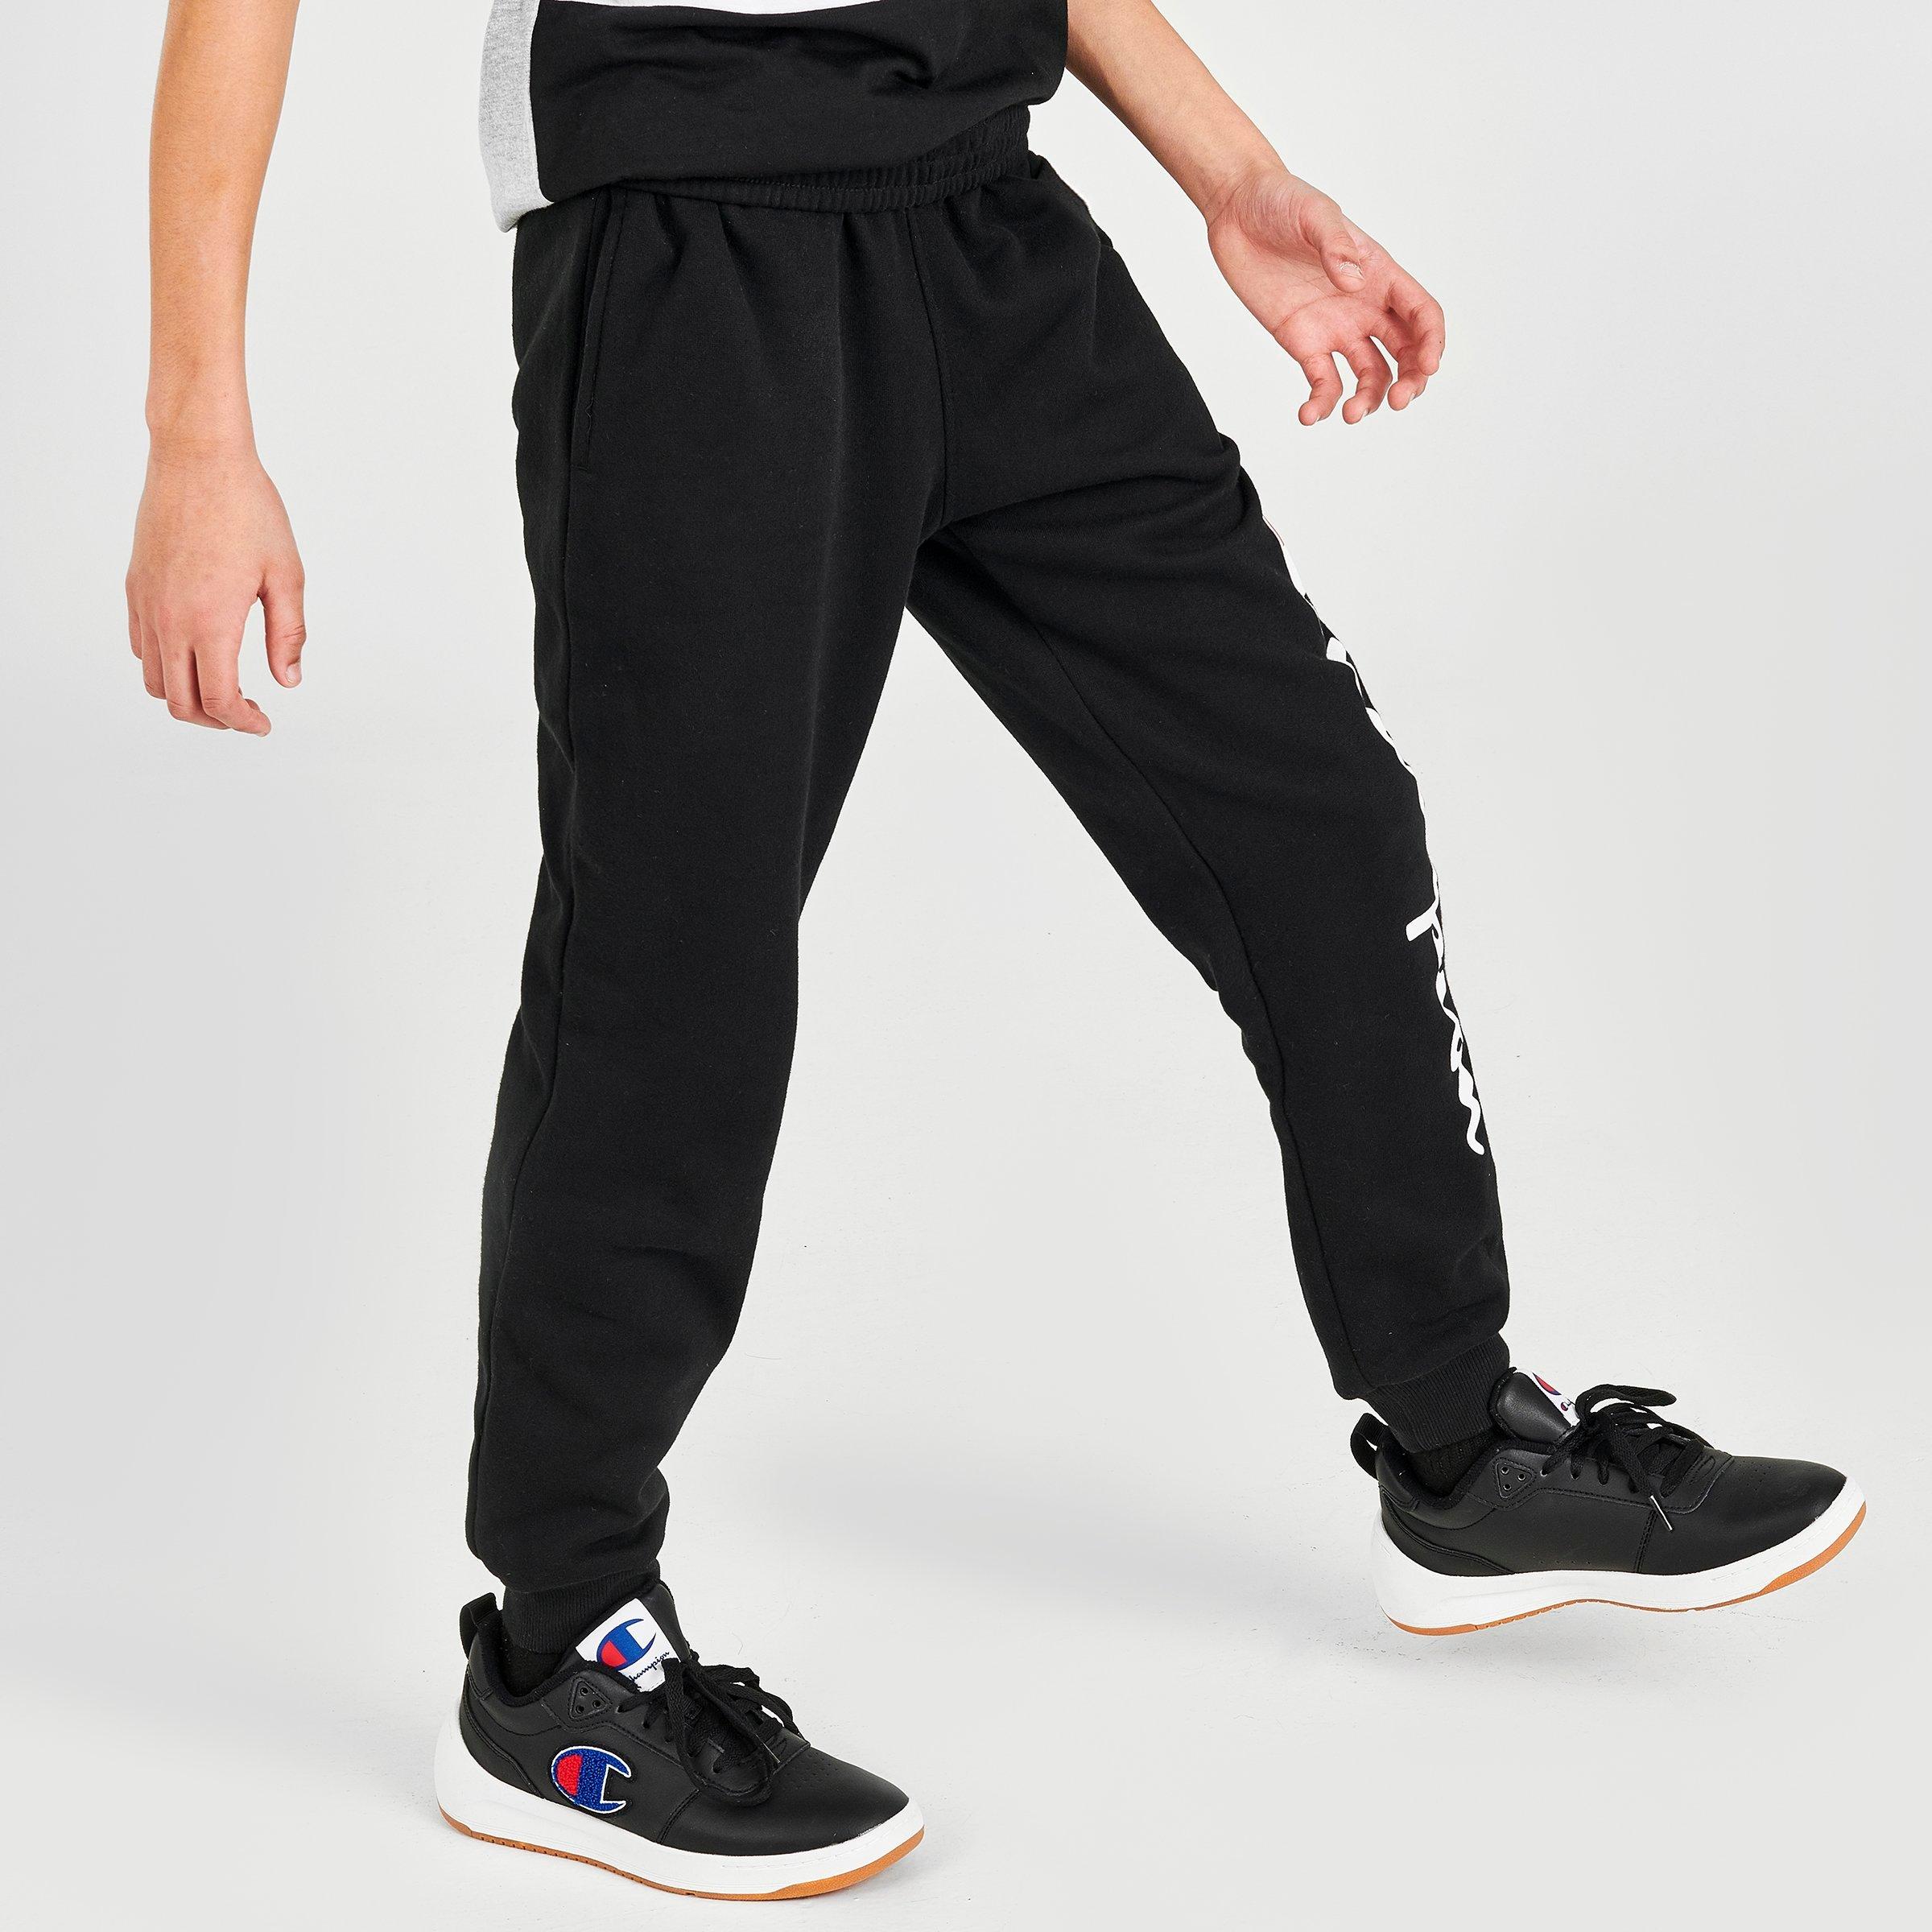 champion heritage hoodie and jogger set